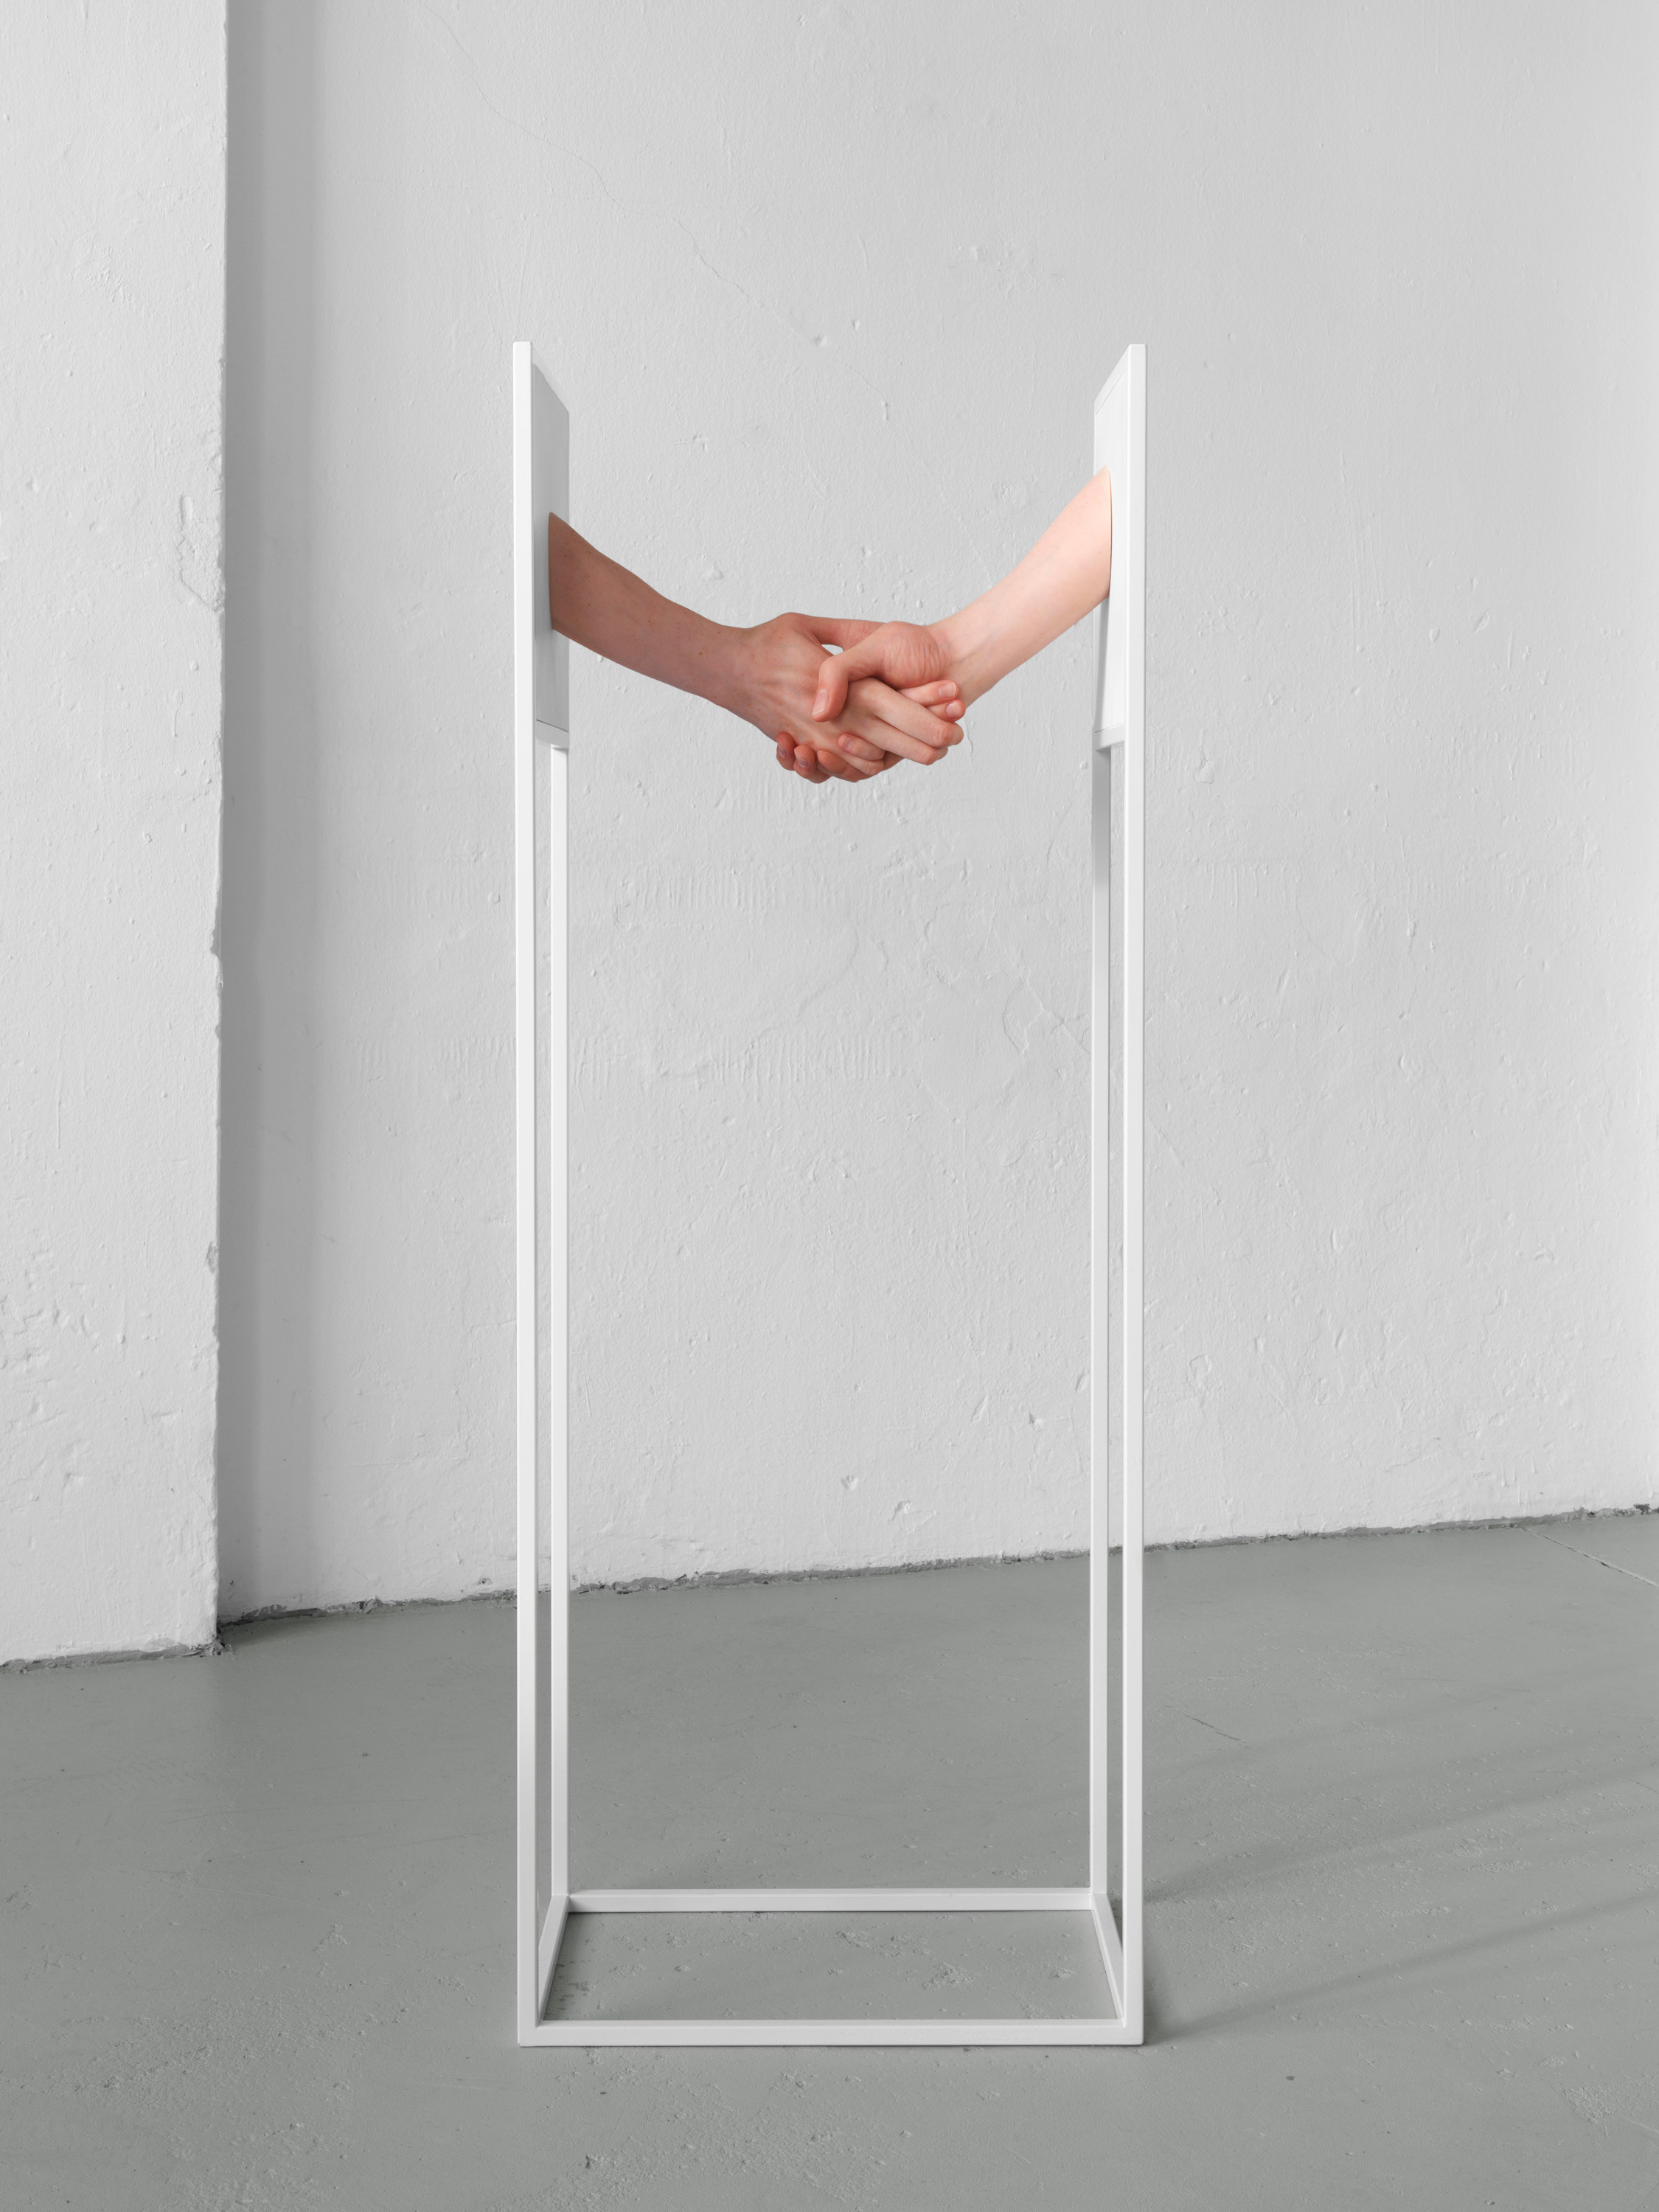 Constant Dullaart  Accepting the Job, 2023 Steel, wood, silicone, resin, paint  130 x 48 x 30 cm